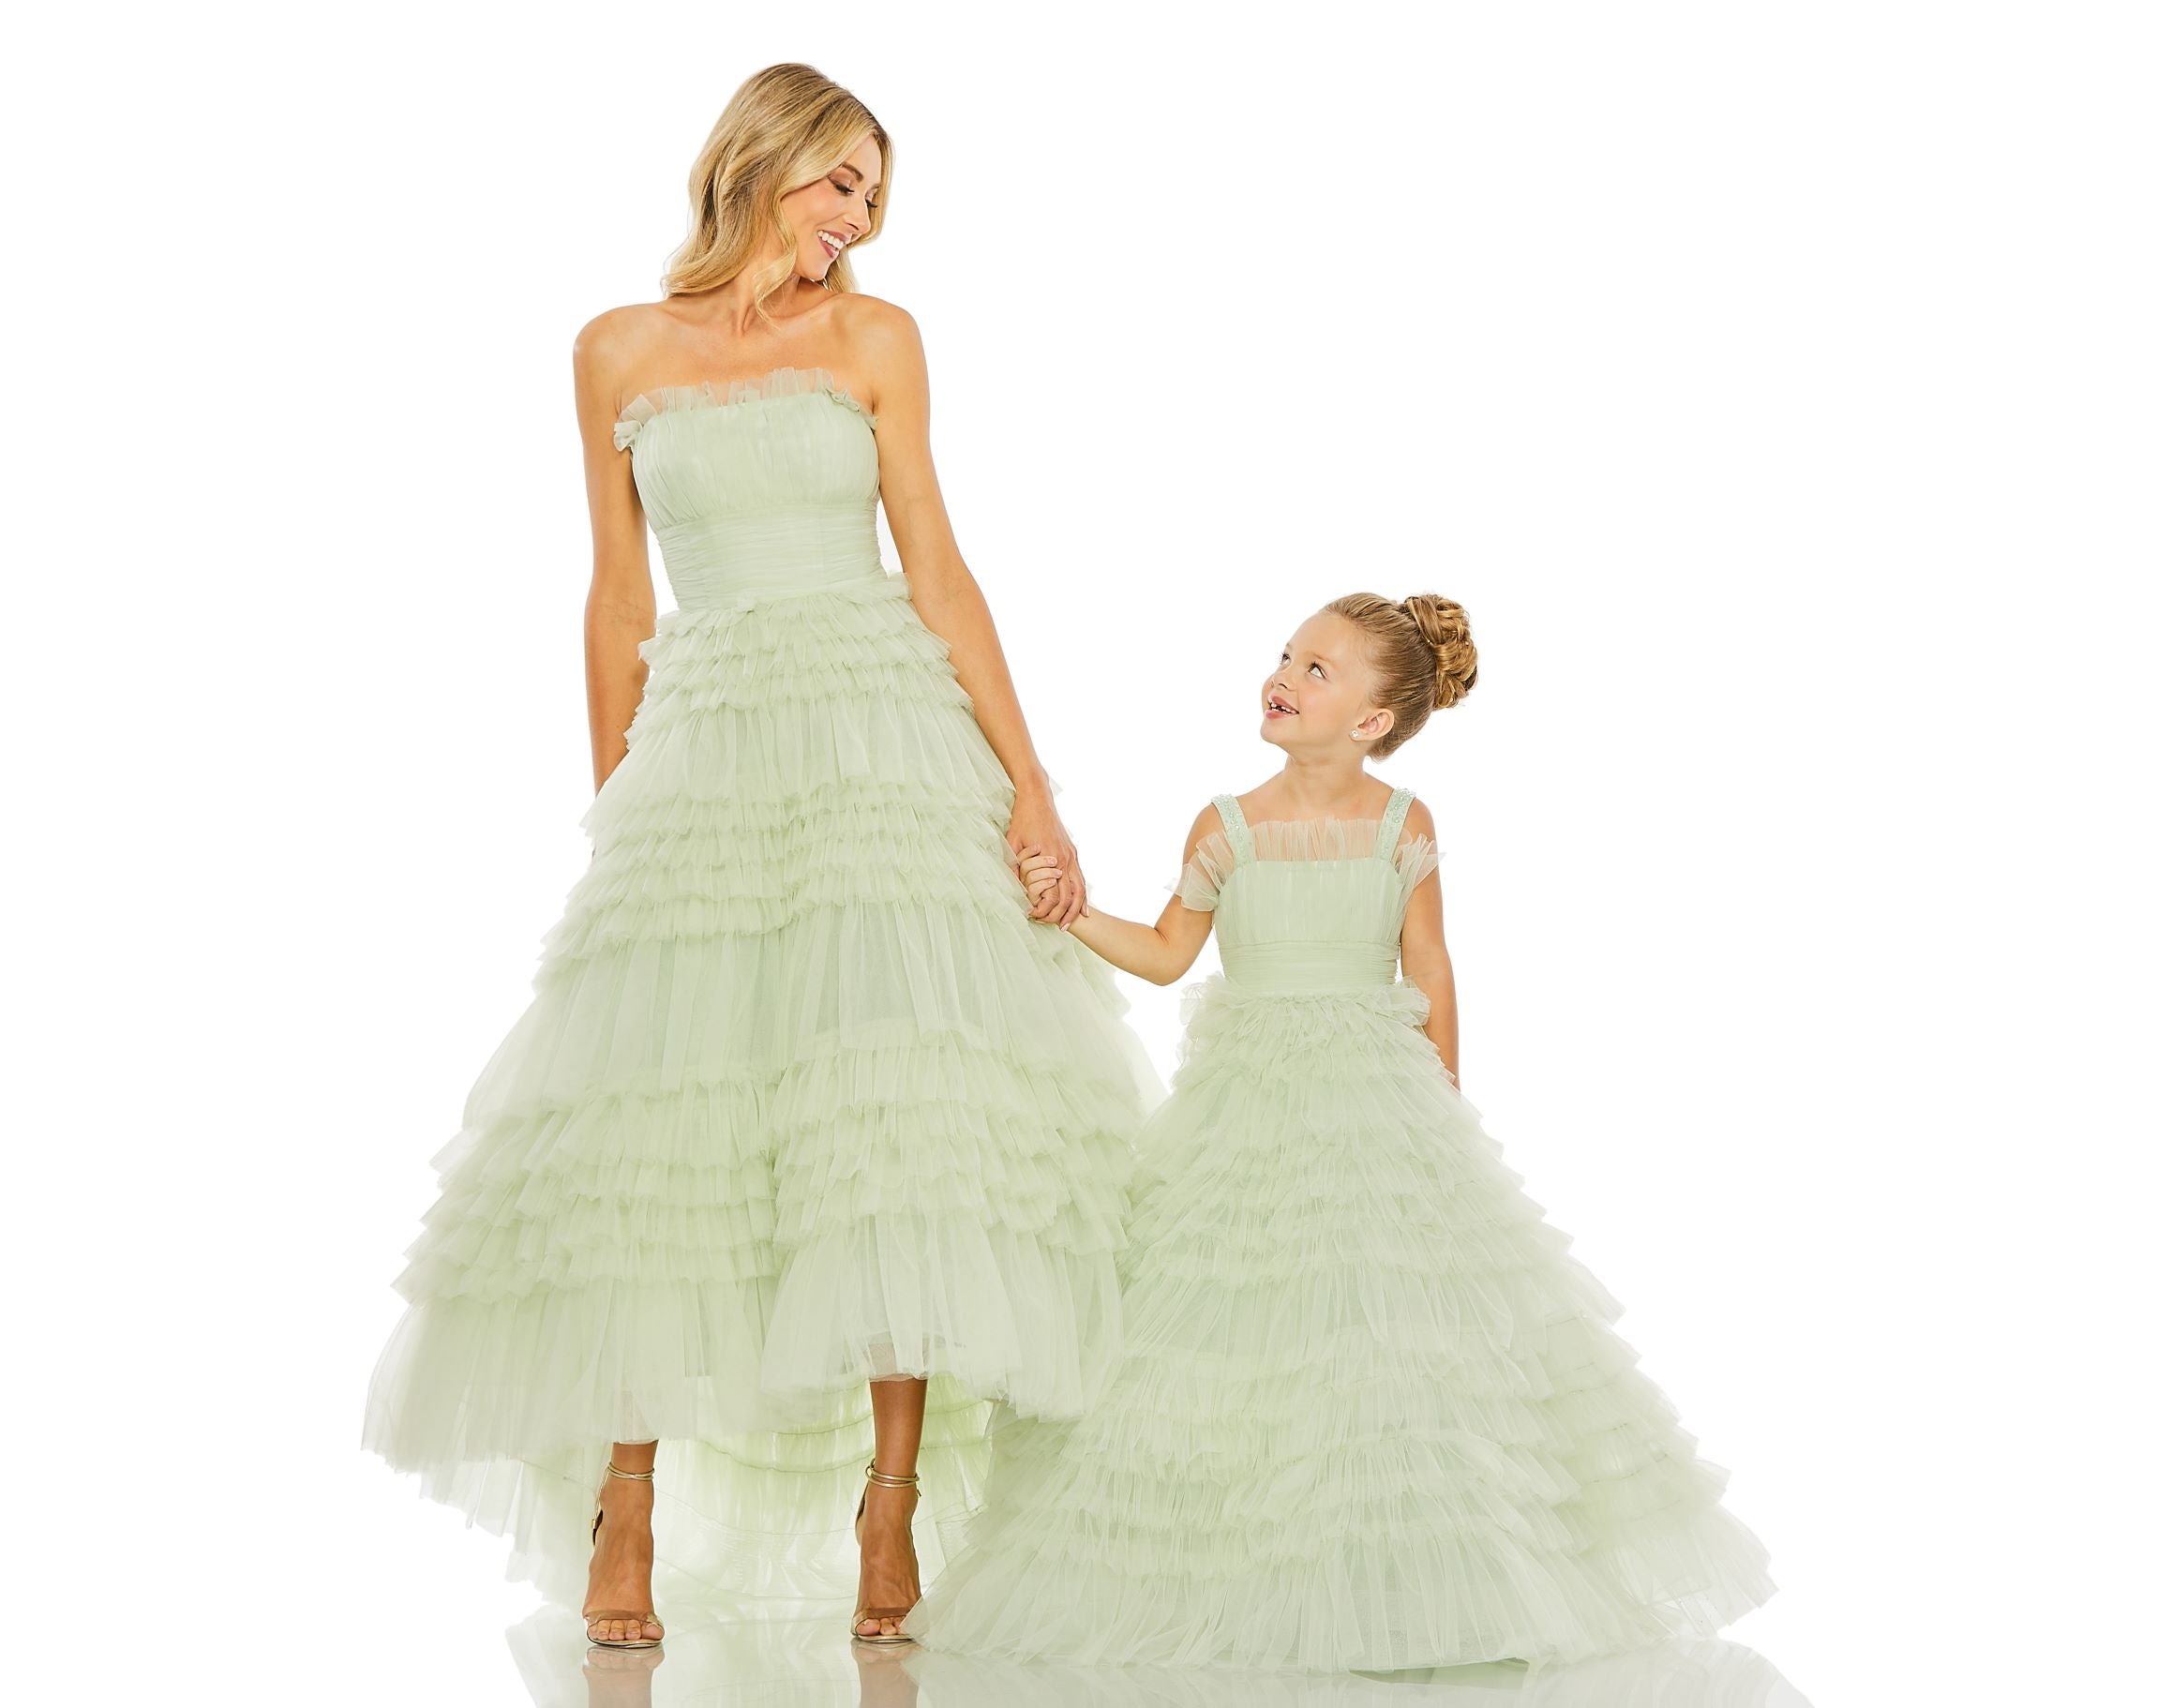 Strapless Tulle Ruffle Gown